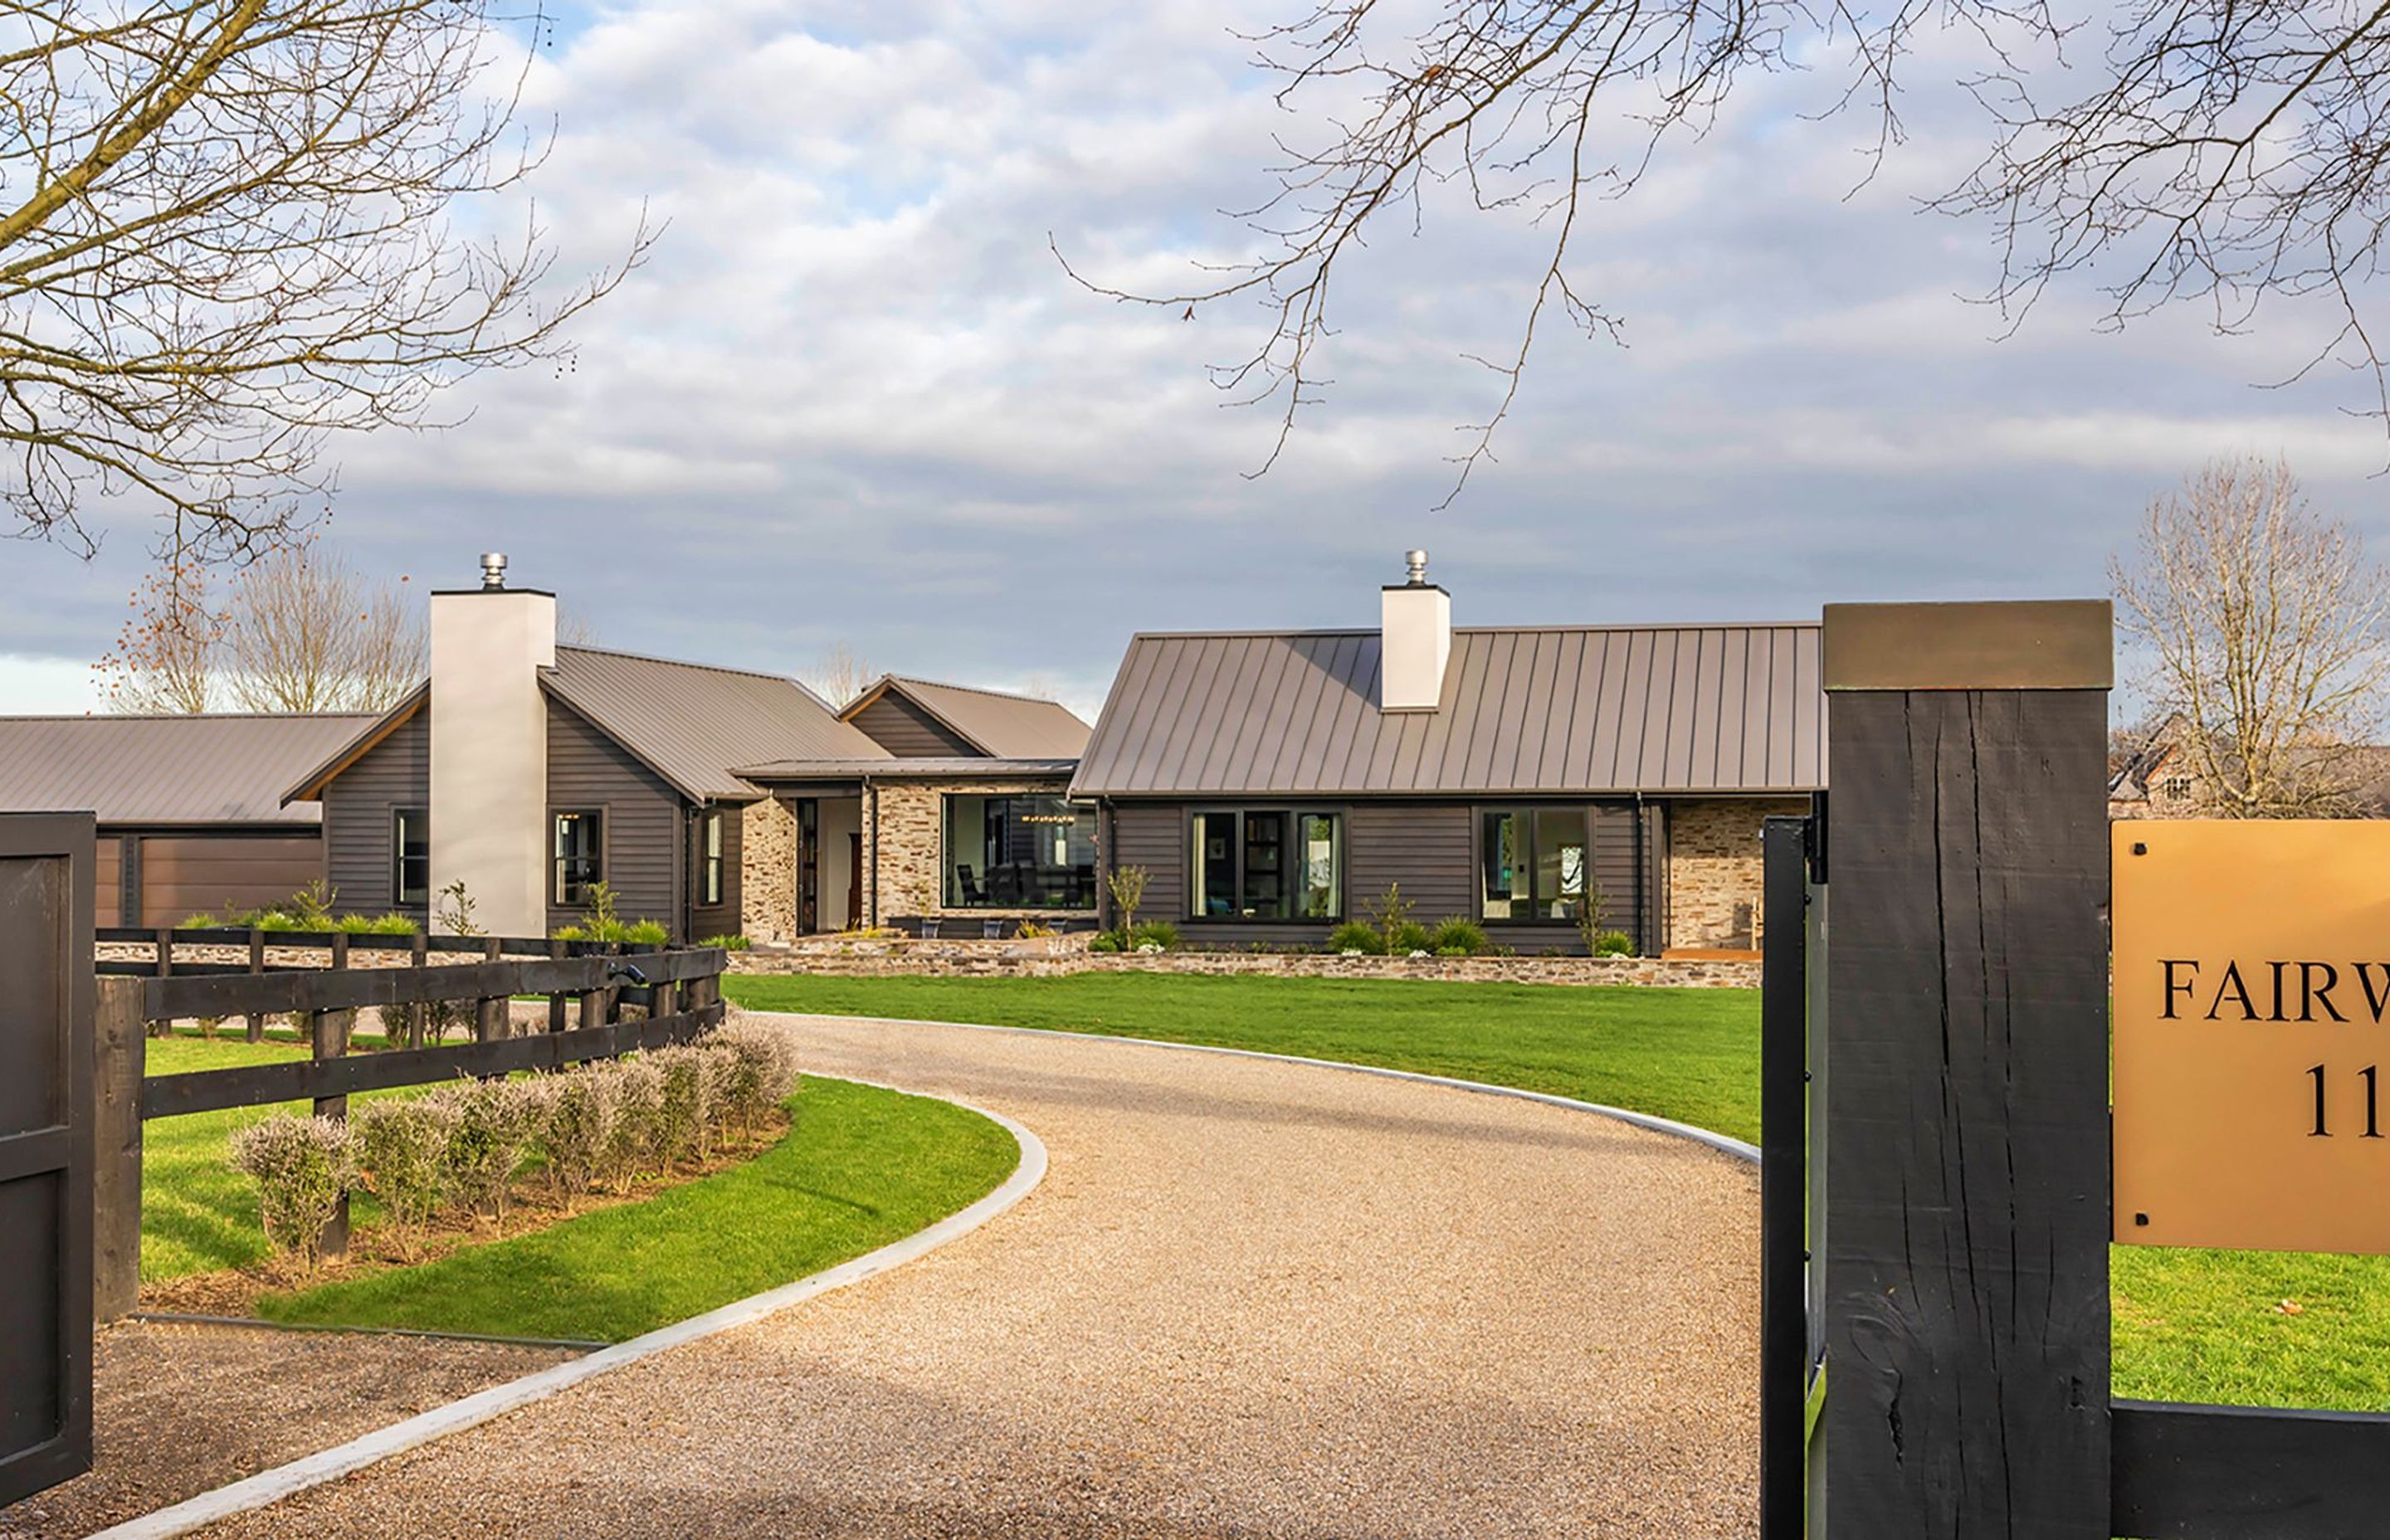 Set within idyllic Cambridge horse country, this rural home has a sophisticated lodge aesthetic with dark-stained cedar weatherboards and bagged stone to the exterior.